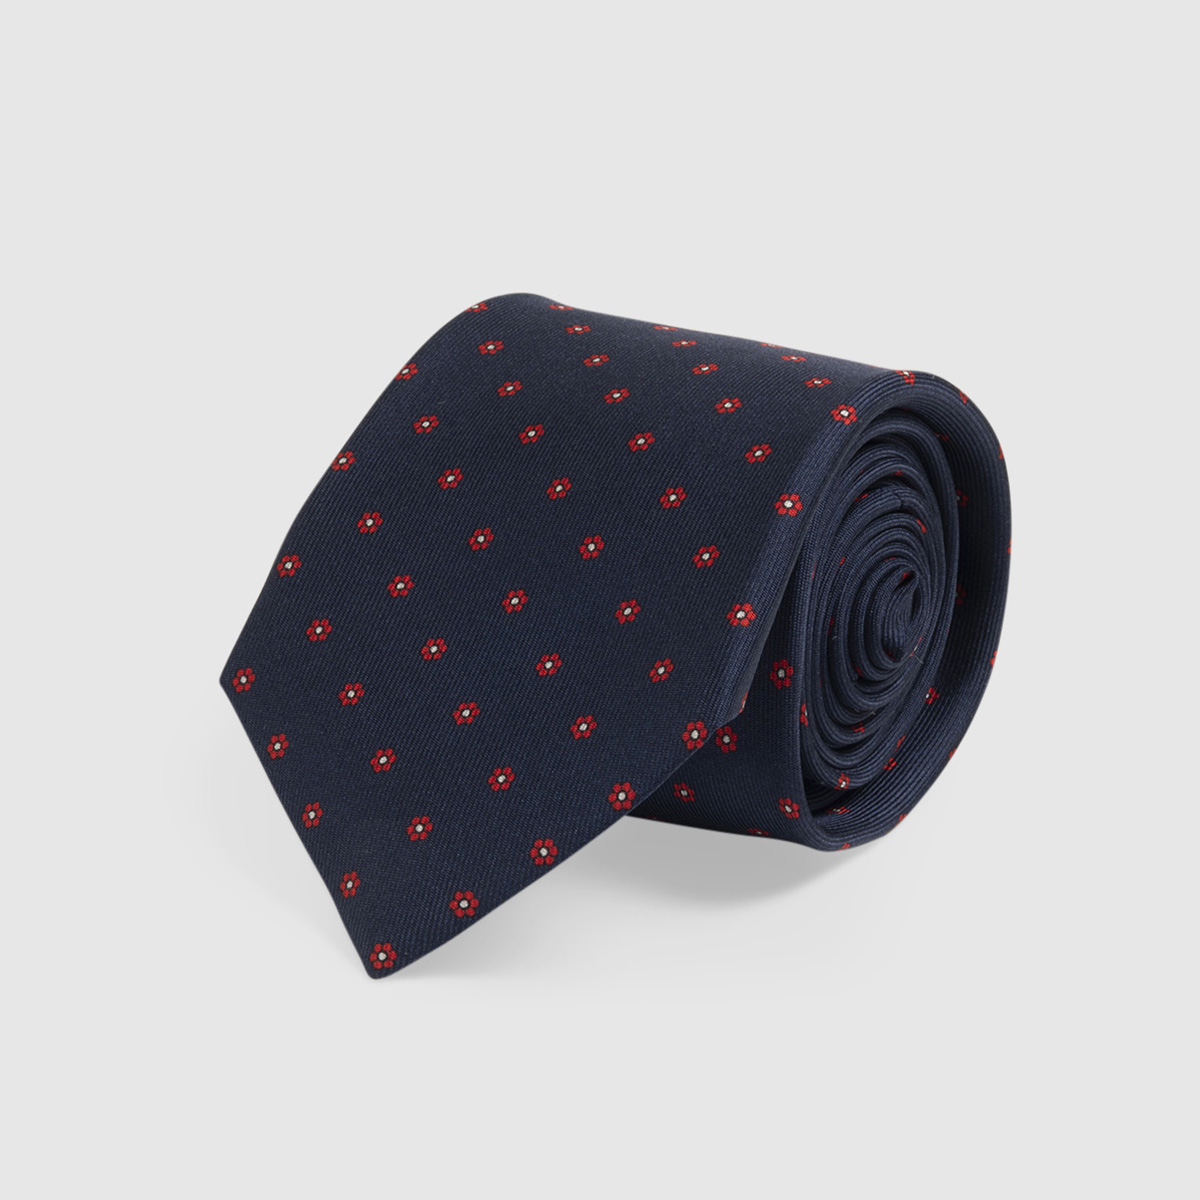 Navy blue silk tie with floral micro-pattern